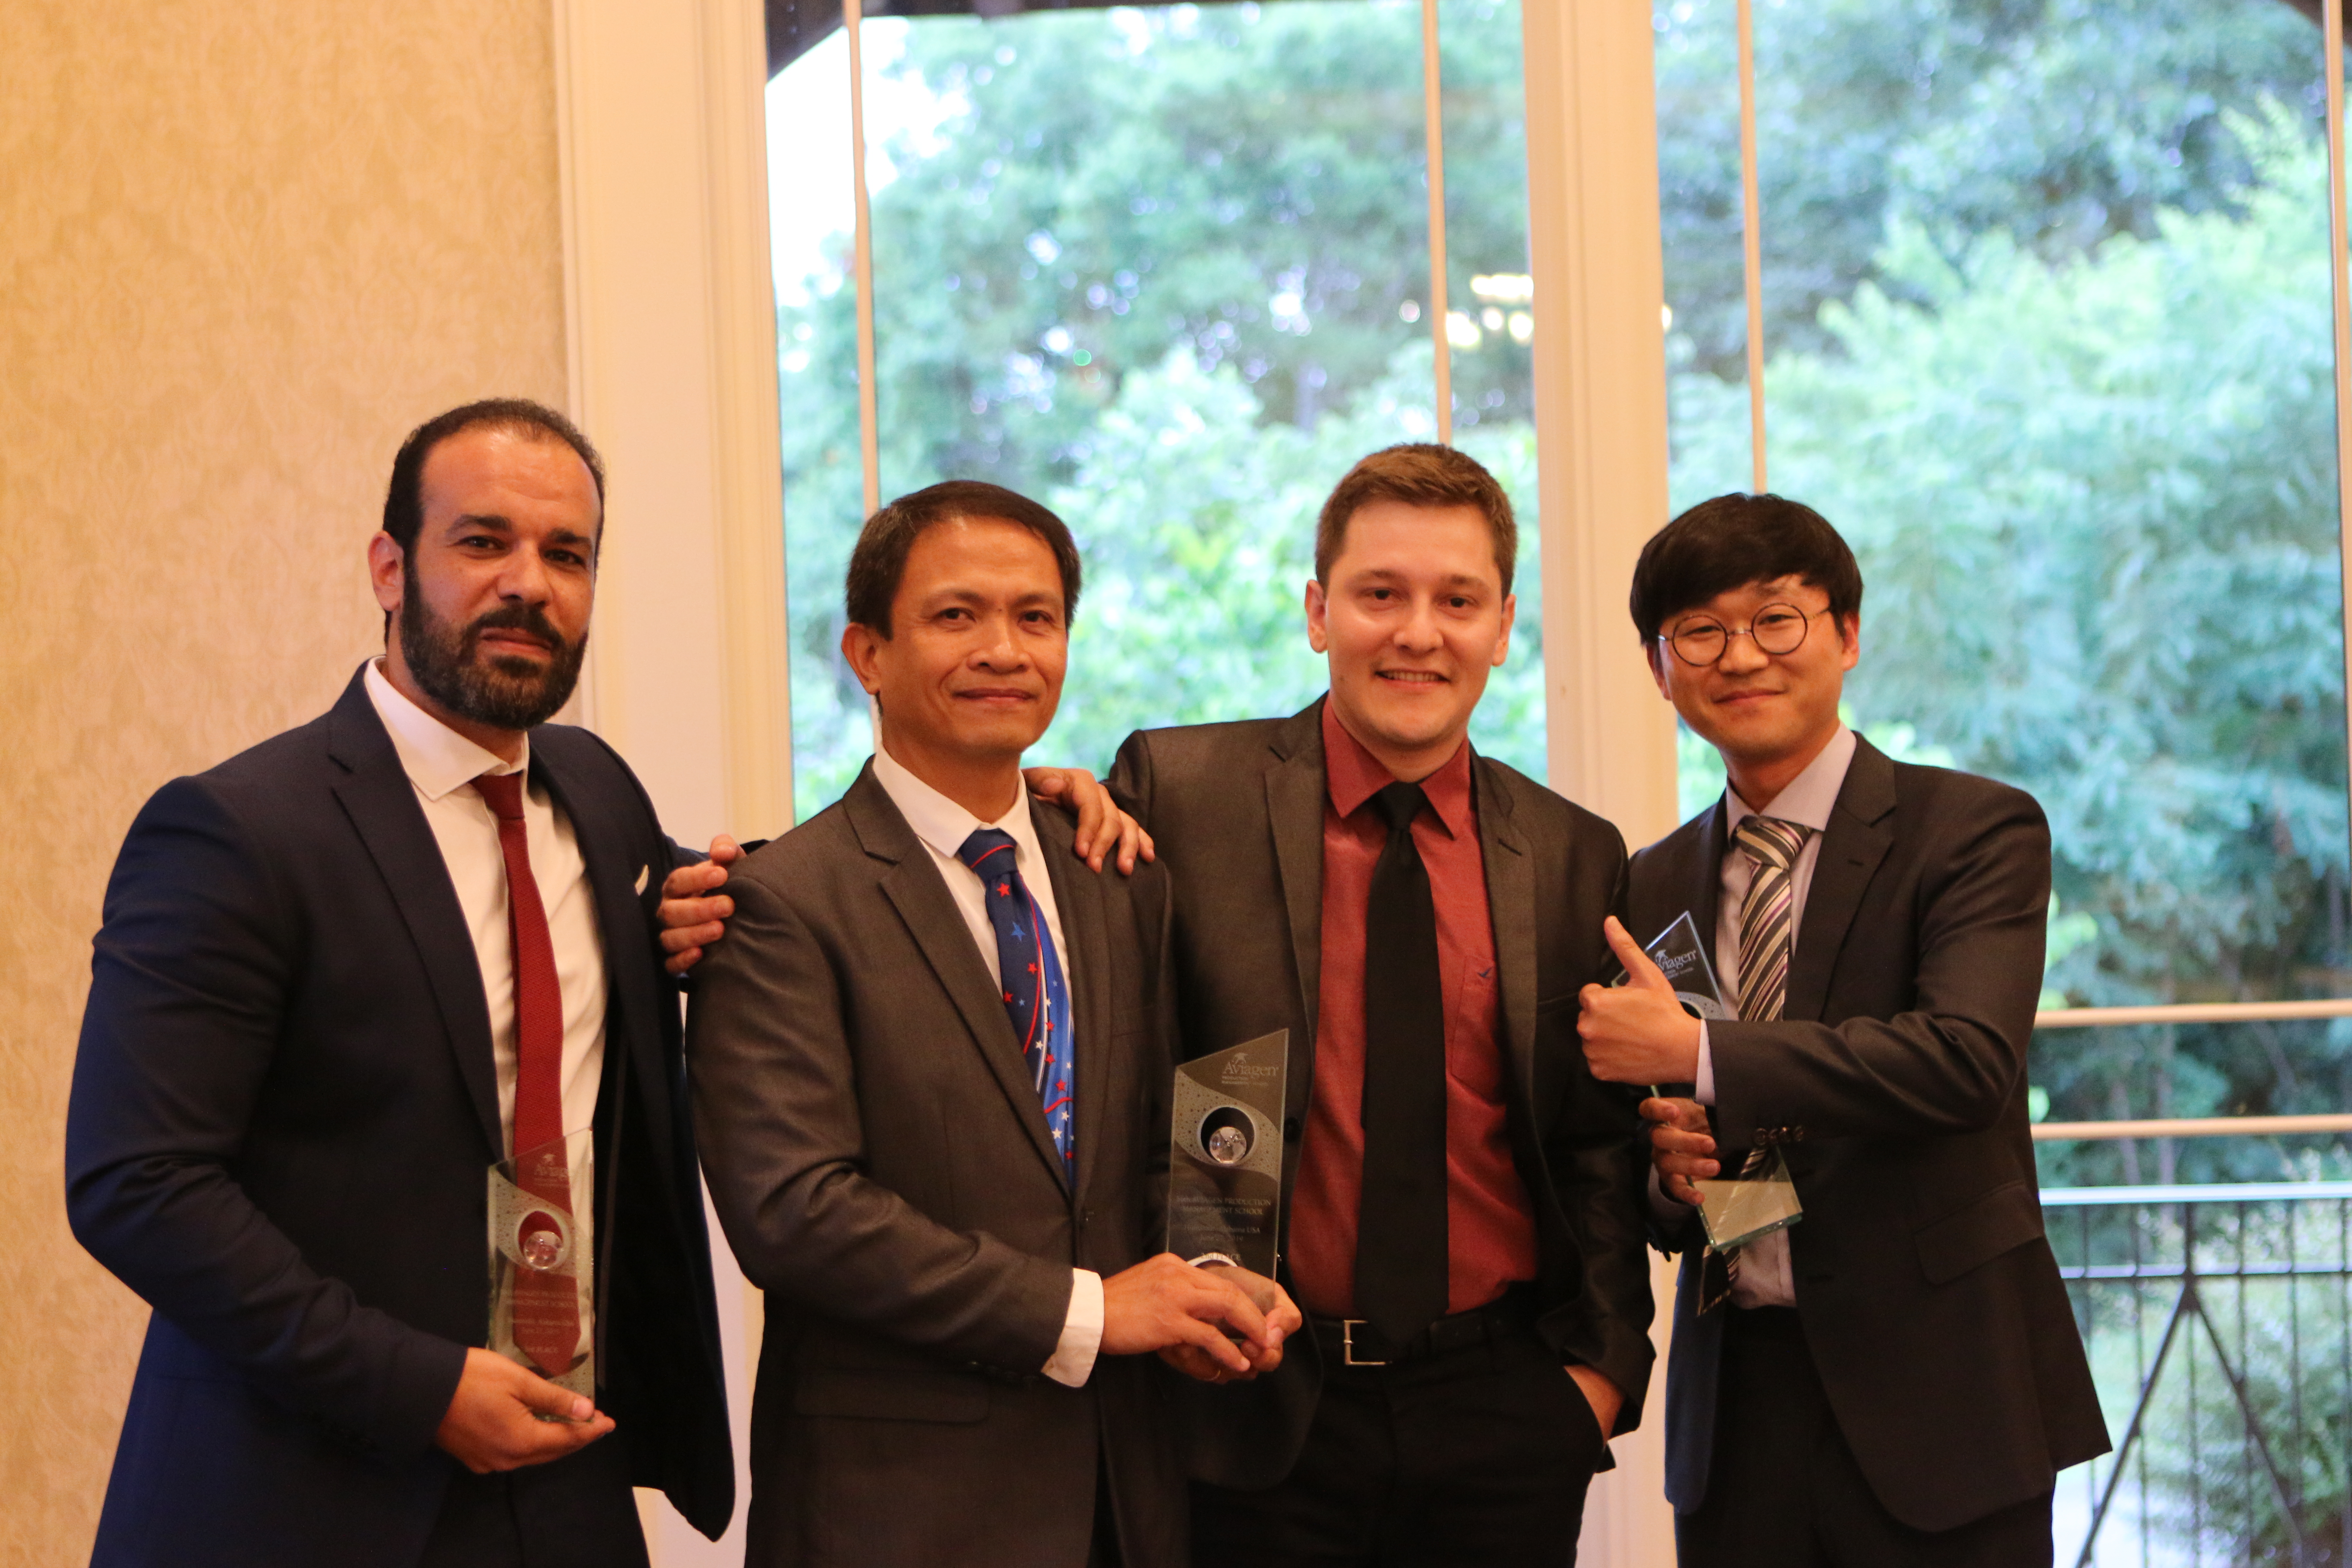 From left: Dr Ahmed Gamal Elnaby, Ross Abraham, Vinicius Duarte and Byoungyoon Kim